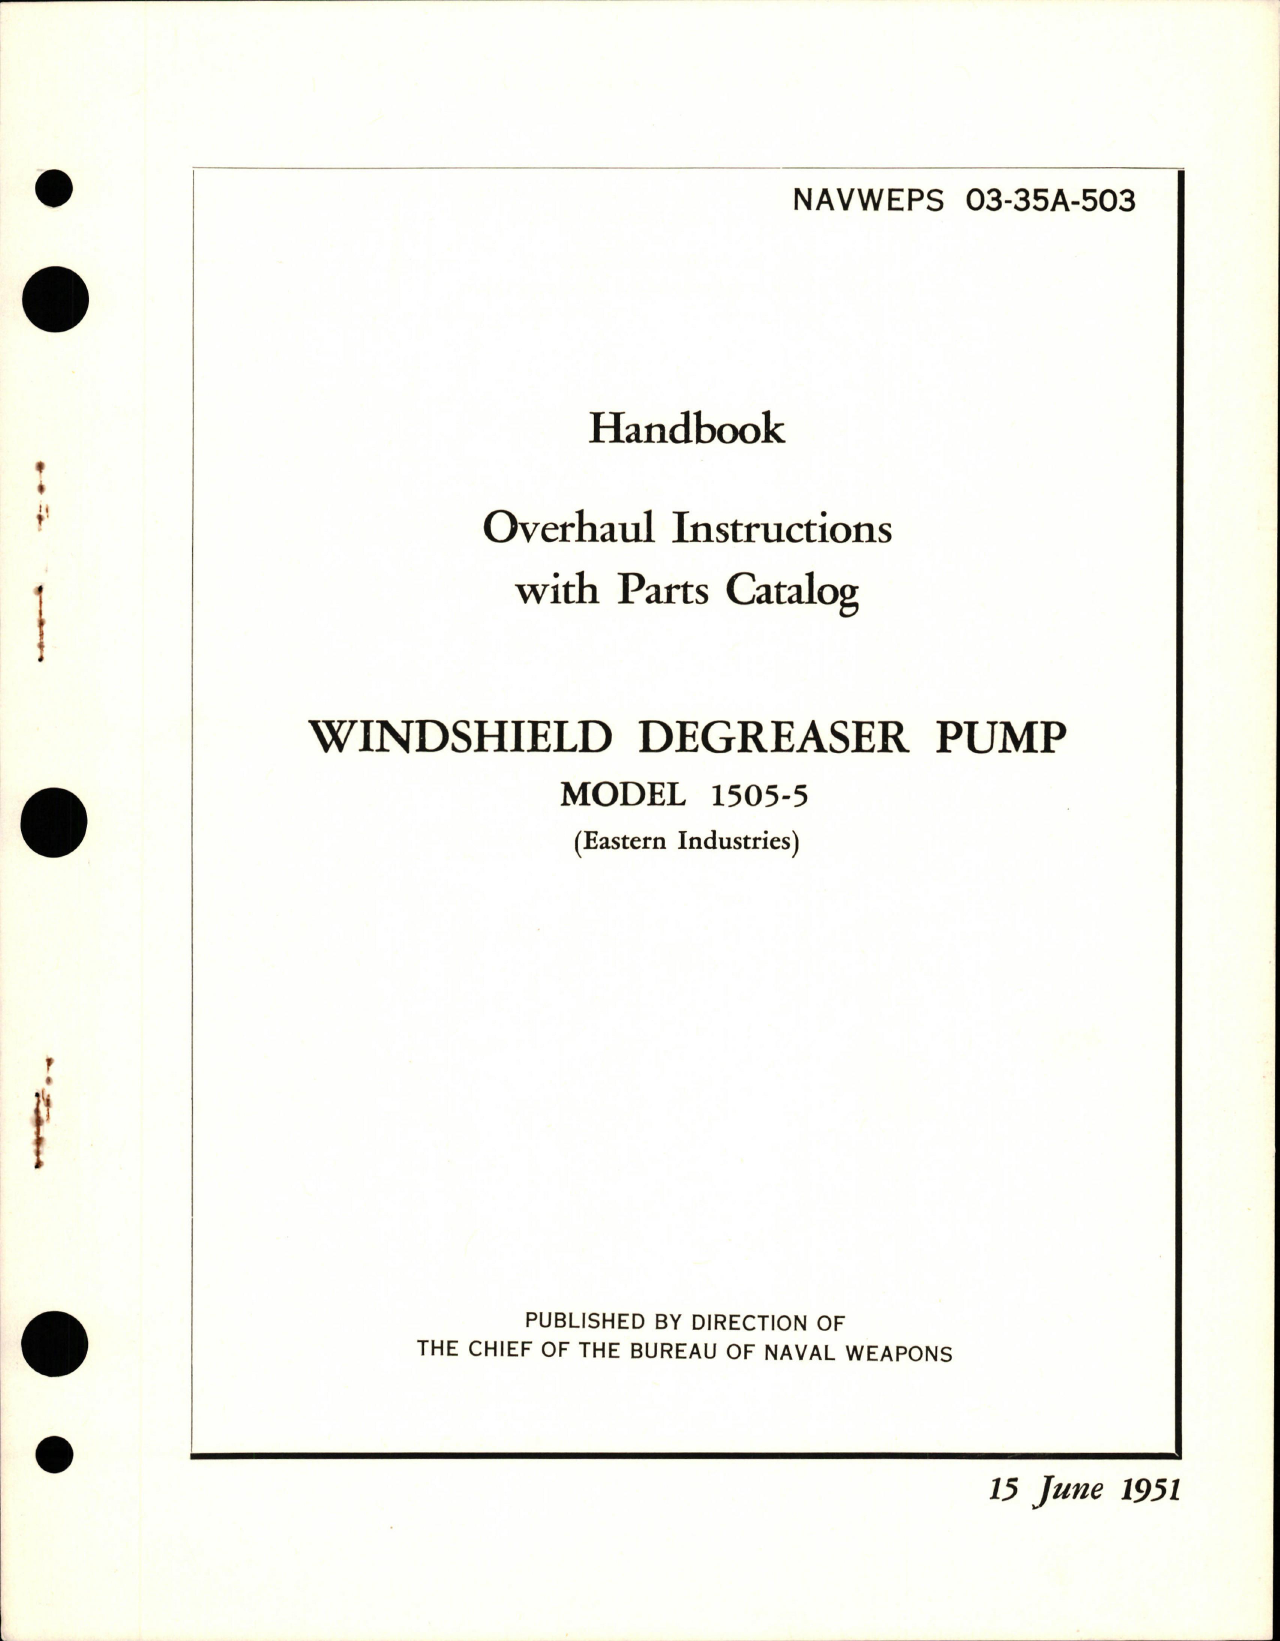 Sample page 1 from AirCorps Library document: Overhaul Instructions with Parts Catalog for Windshield Degreaser Pump - Model 1505-5